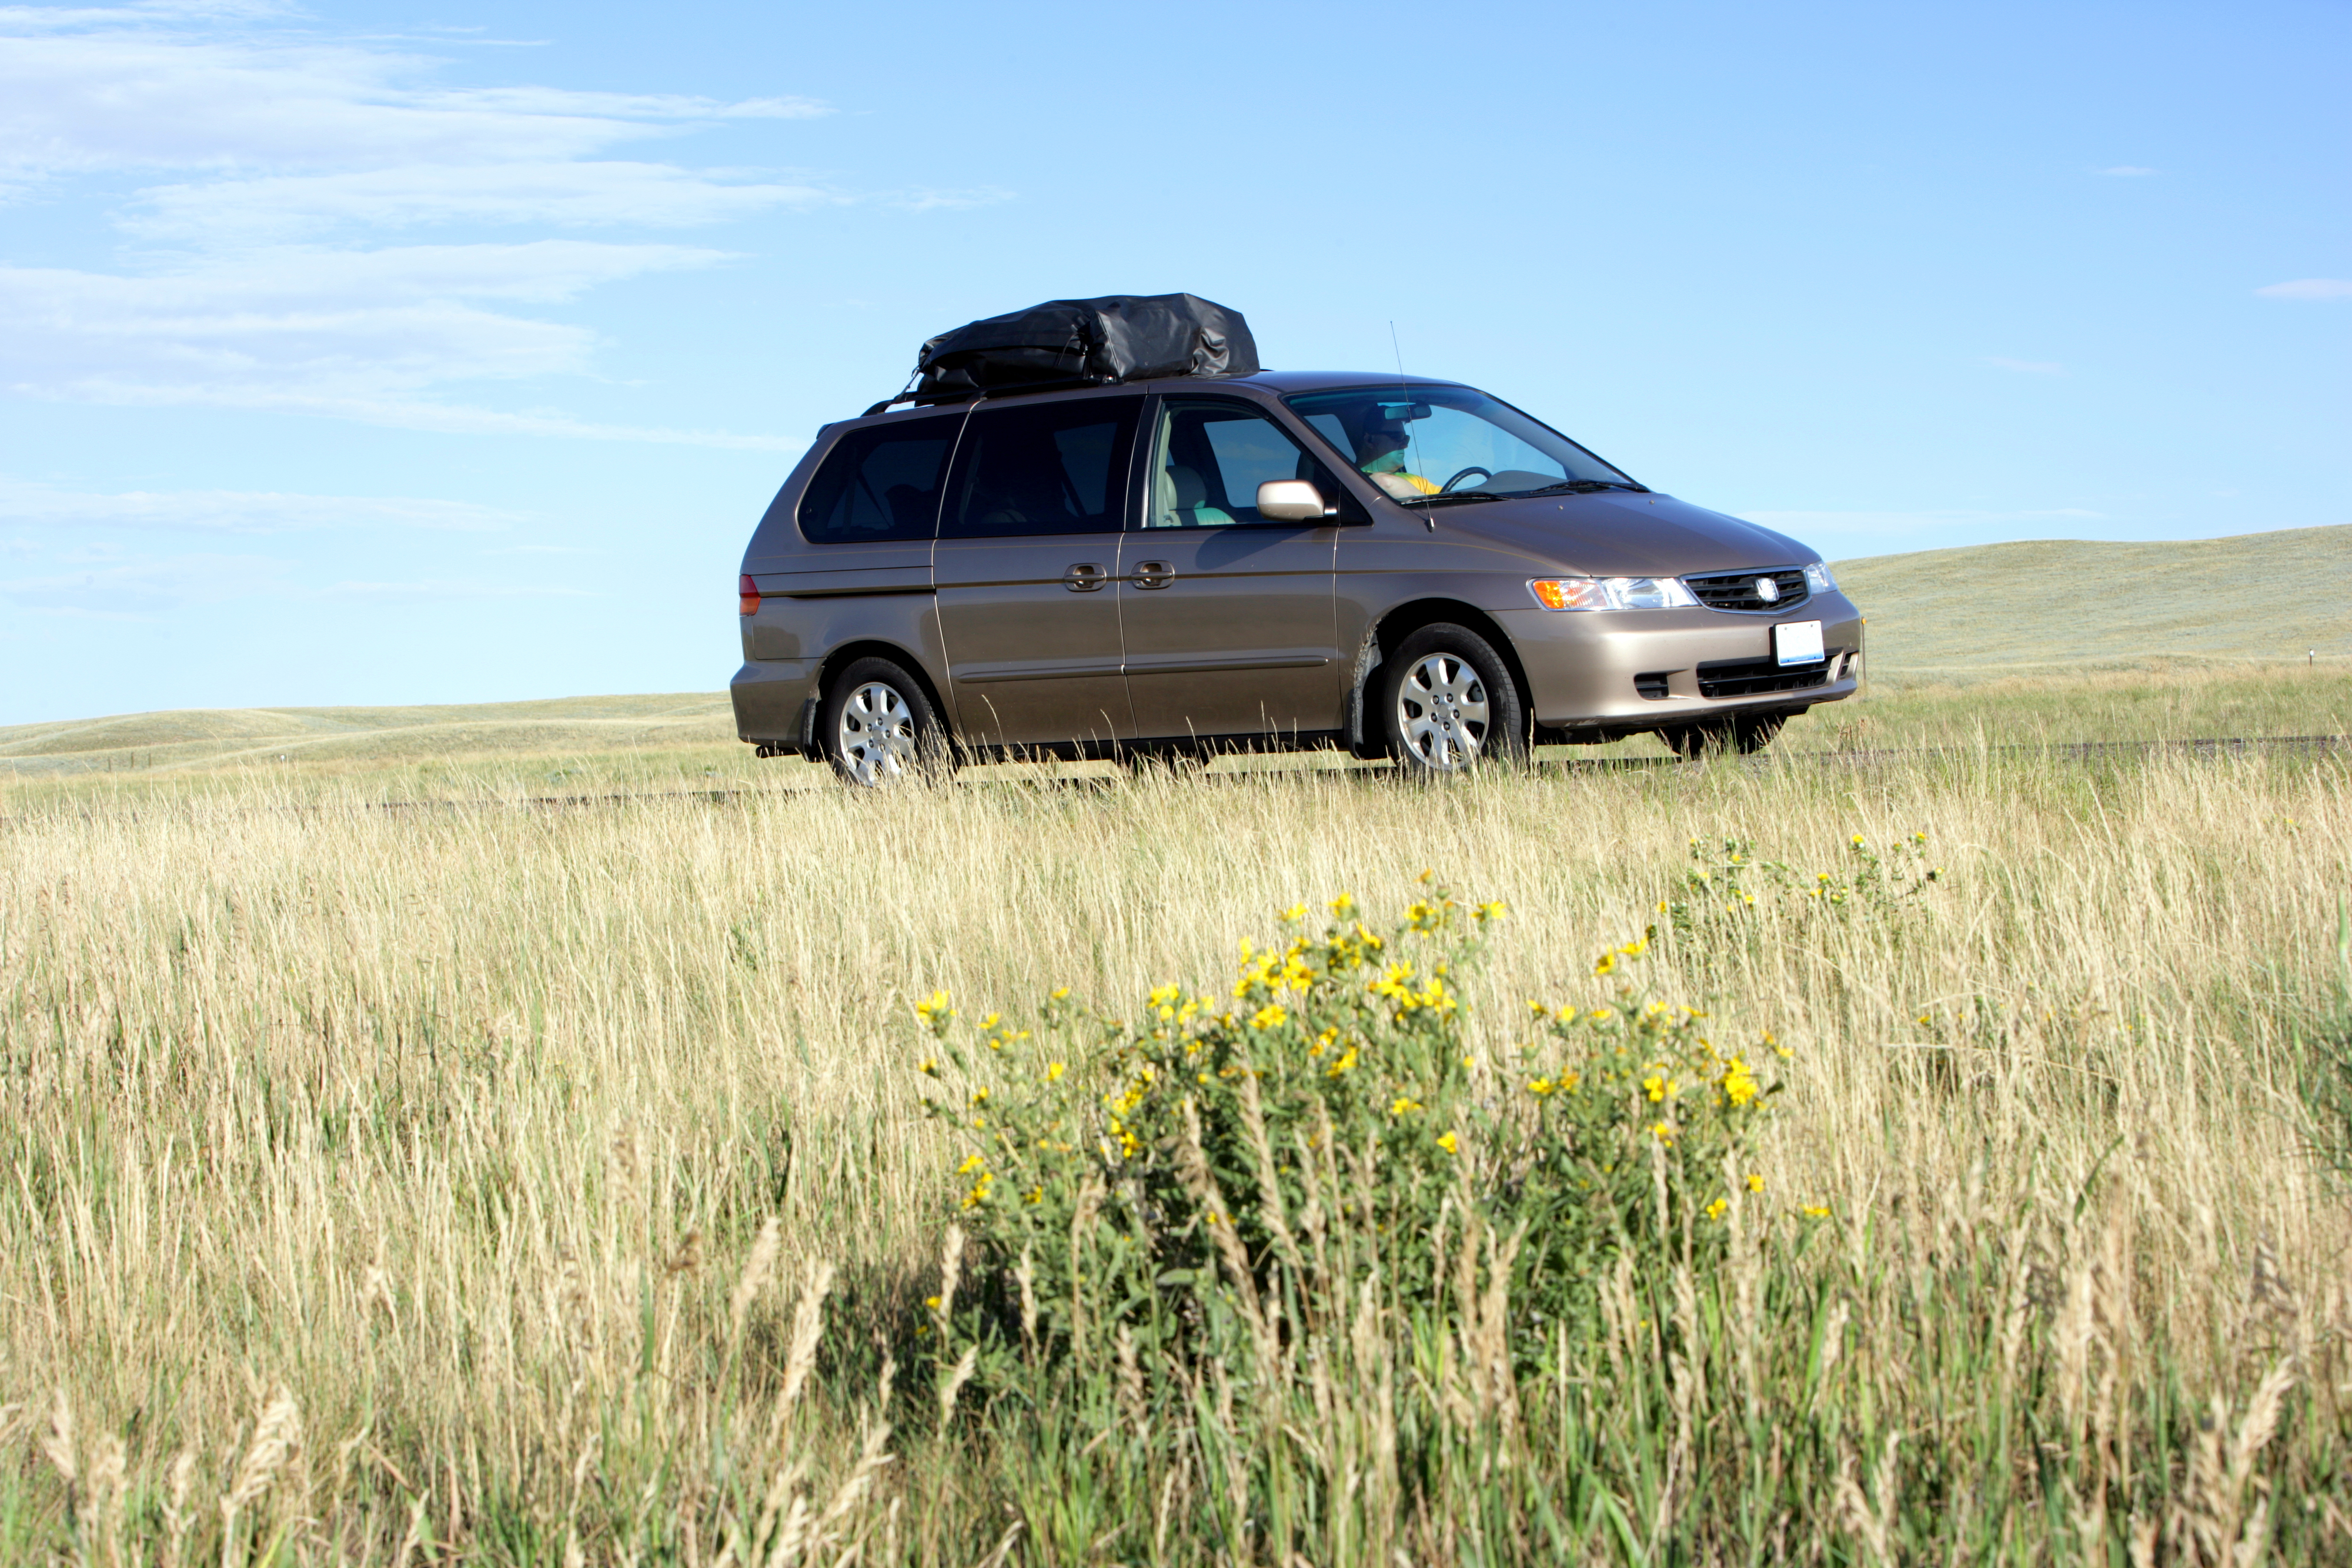 A minivan parked on a grassy field with a black cargo bag on the roof. The sky is clear with sparse clouds